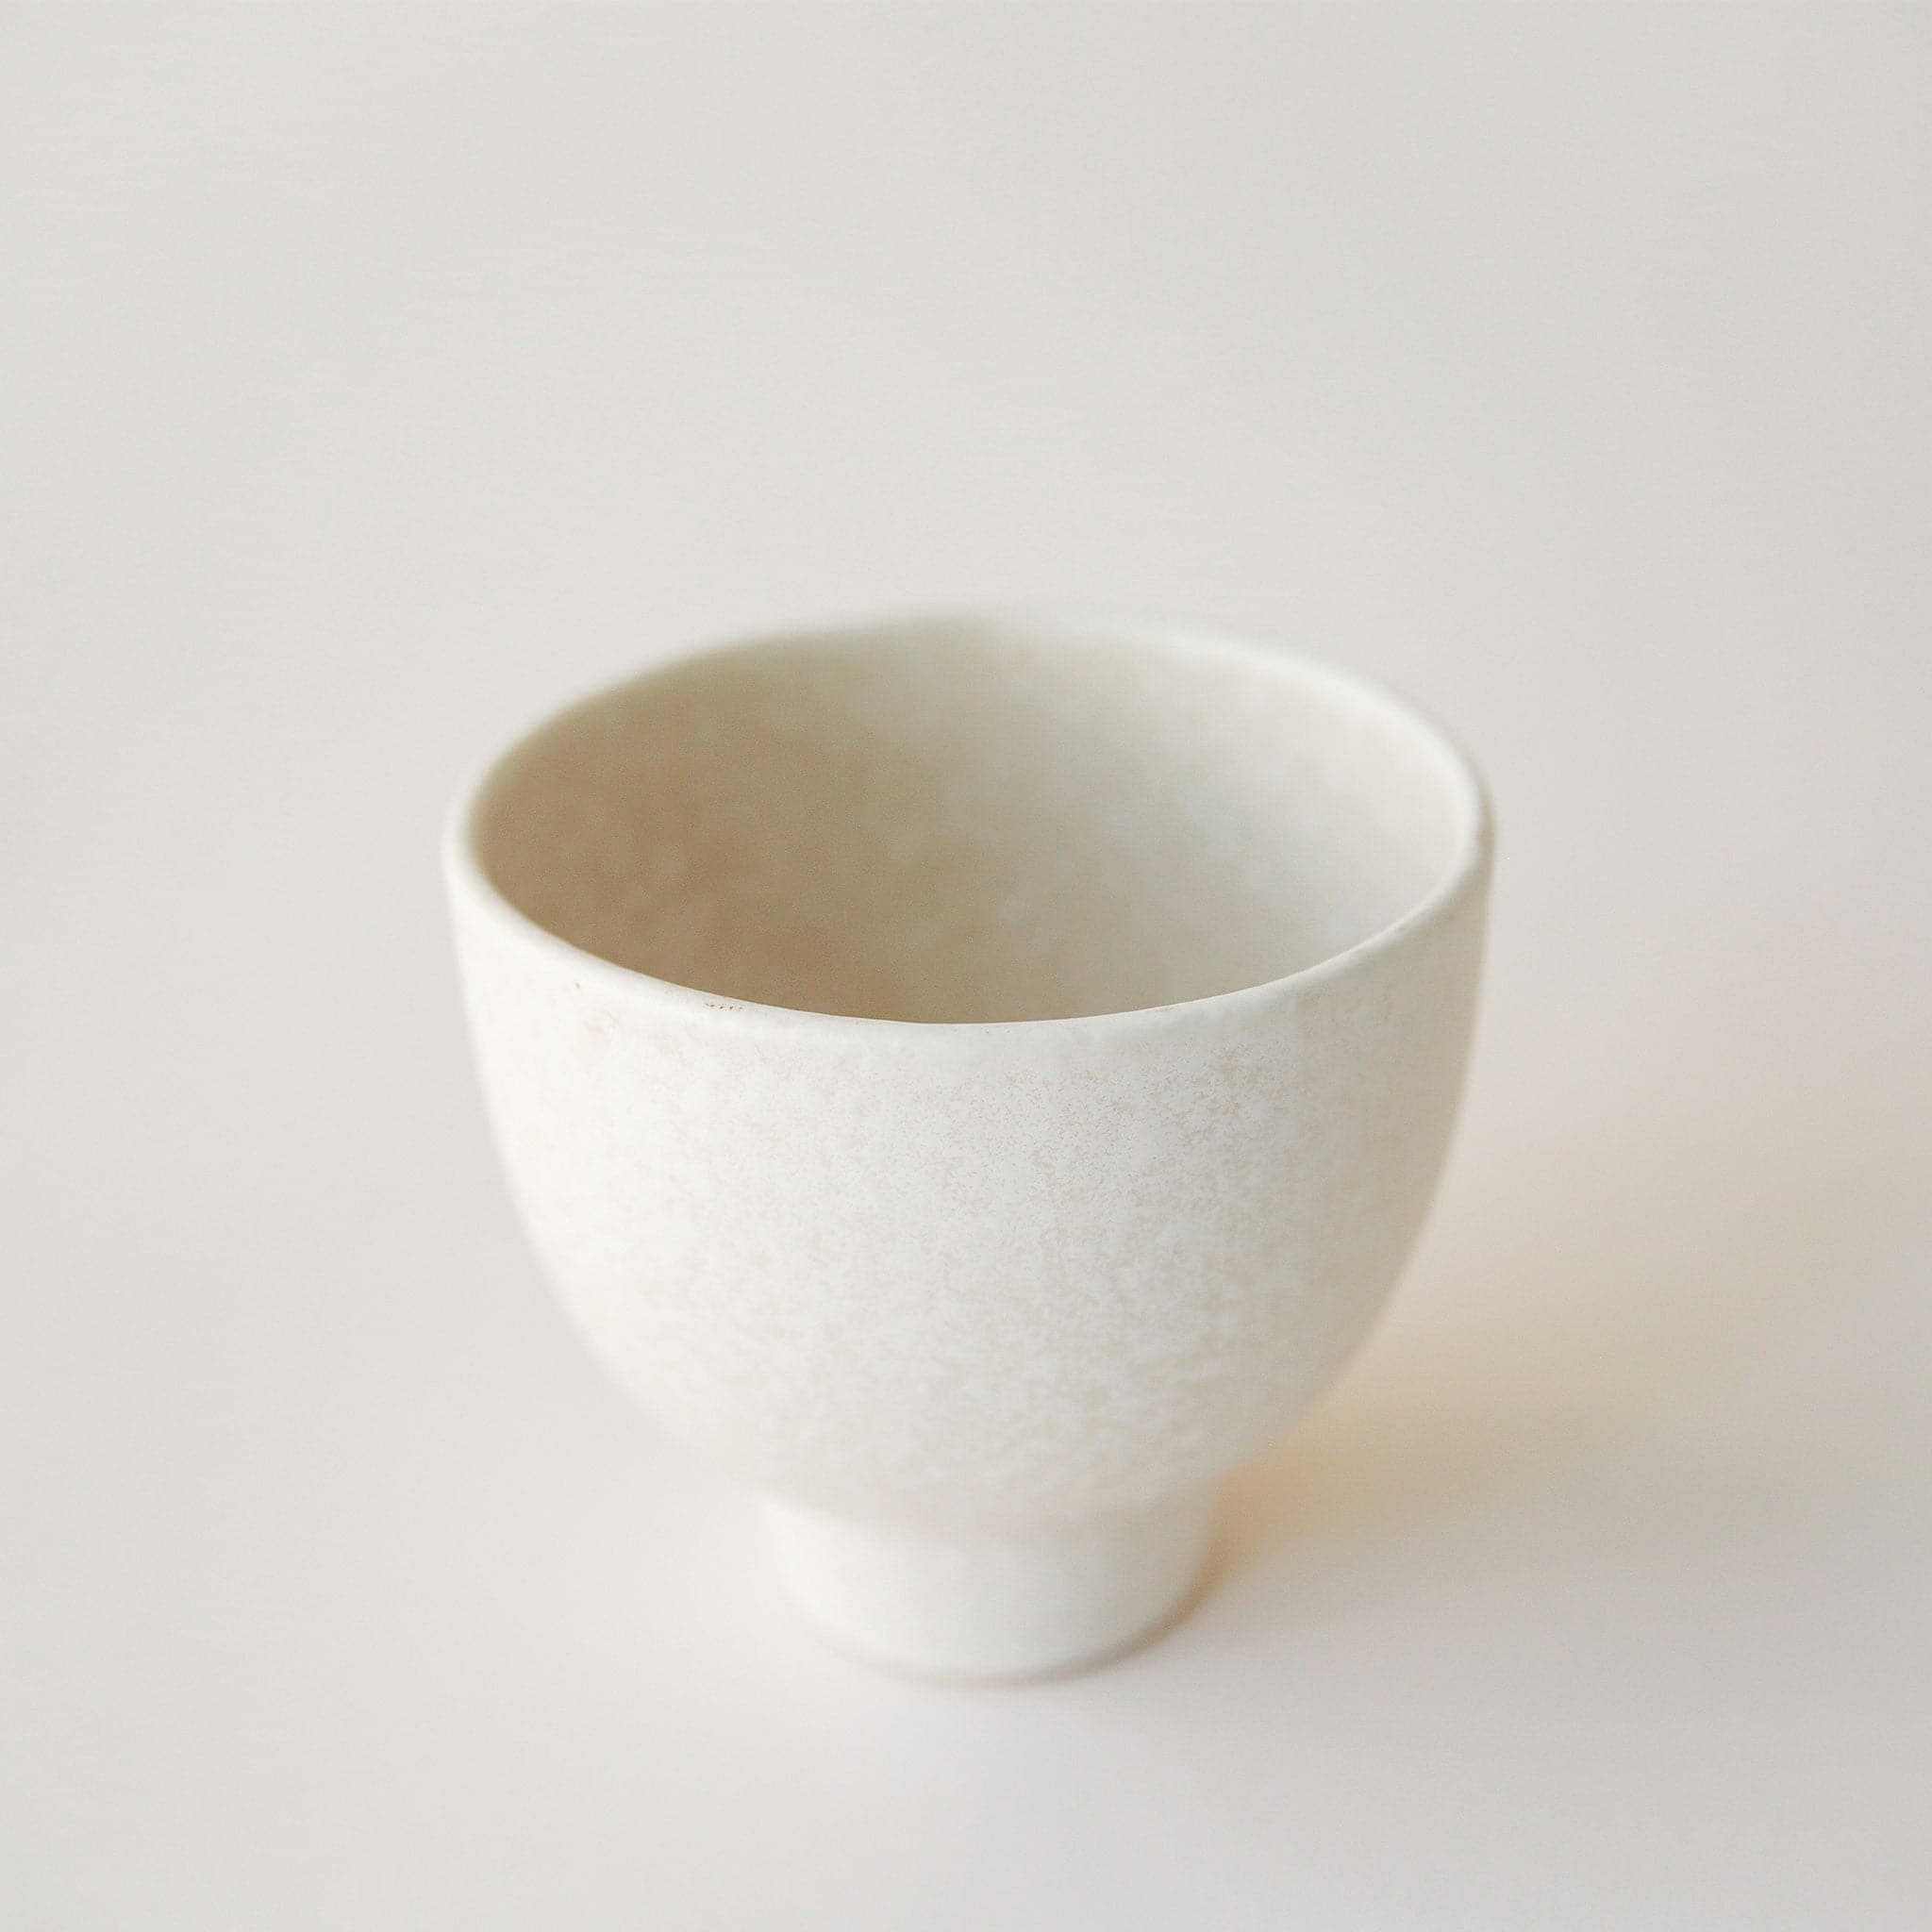 A white pedestal bowl / planter with a slight beige speckling print all over.